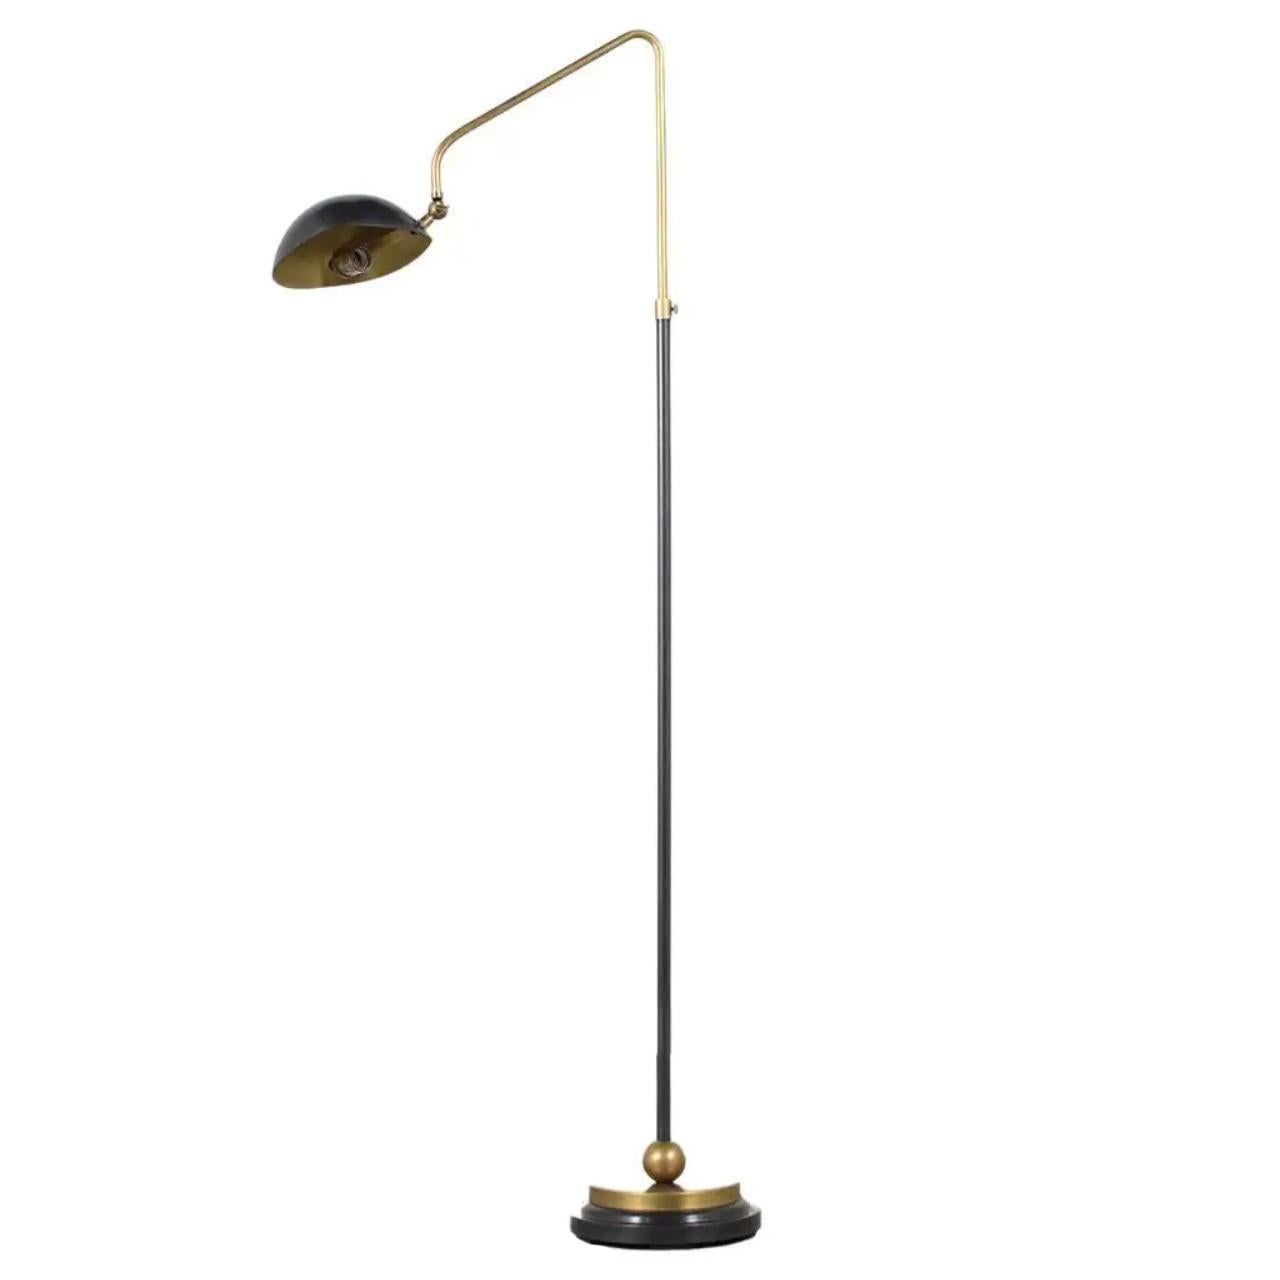 Hand-Crafted Mid-Century Modern Brass Floor Lamp with Adjustable Dimmer For Sale